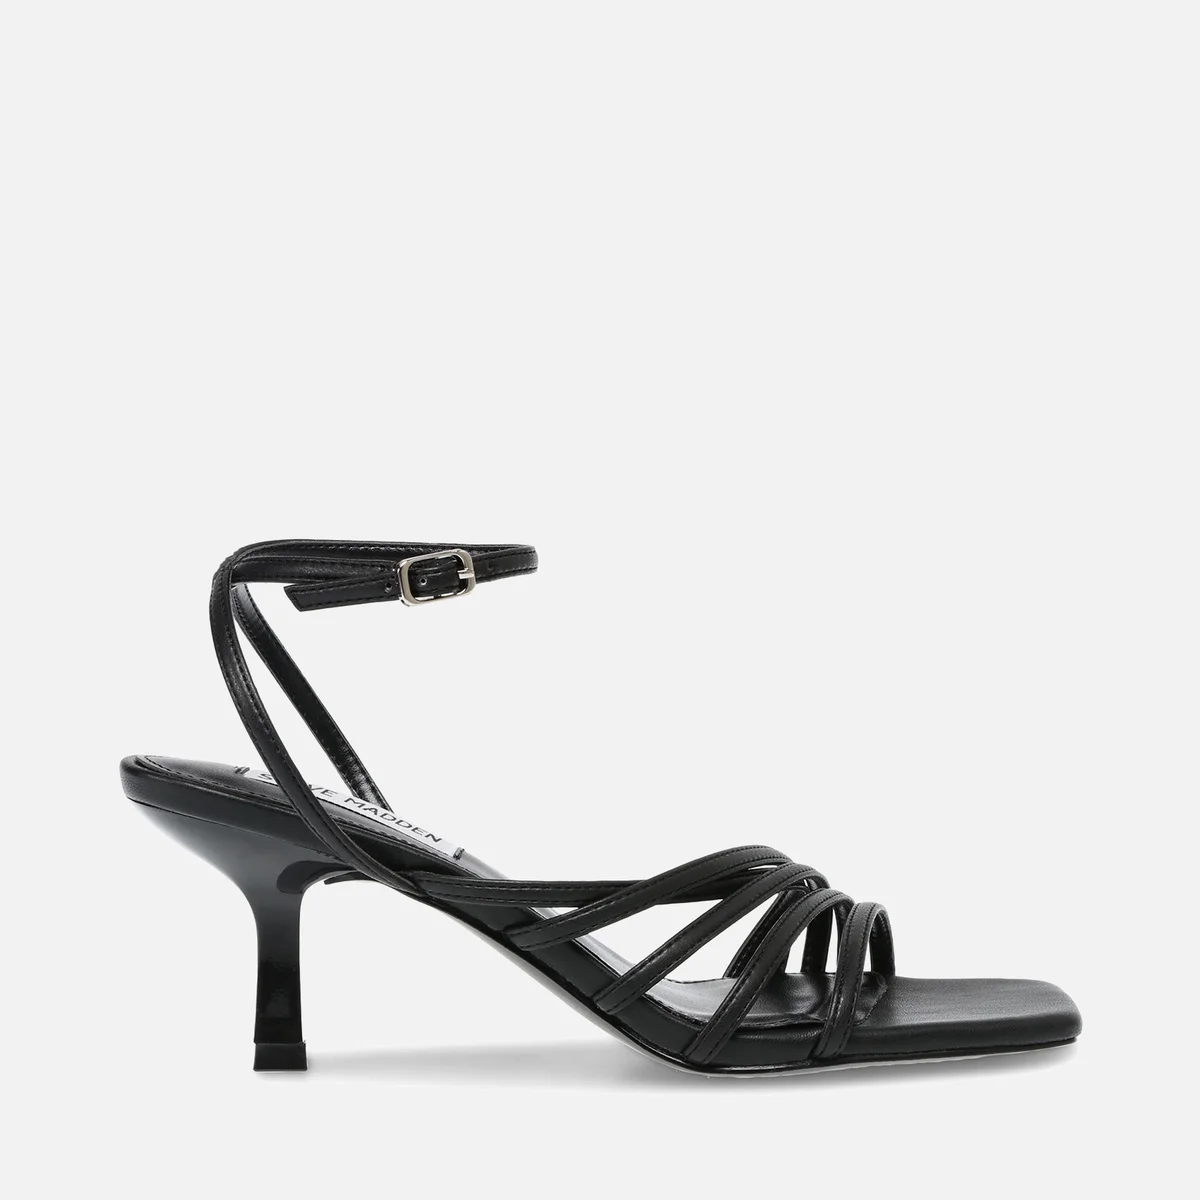 Steve Madden Mid-Heeled Faux Leather Sandals Image 1